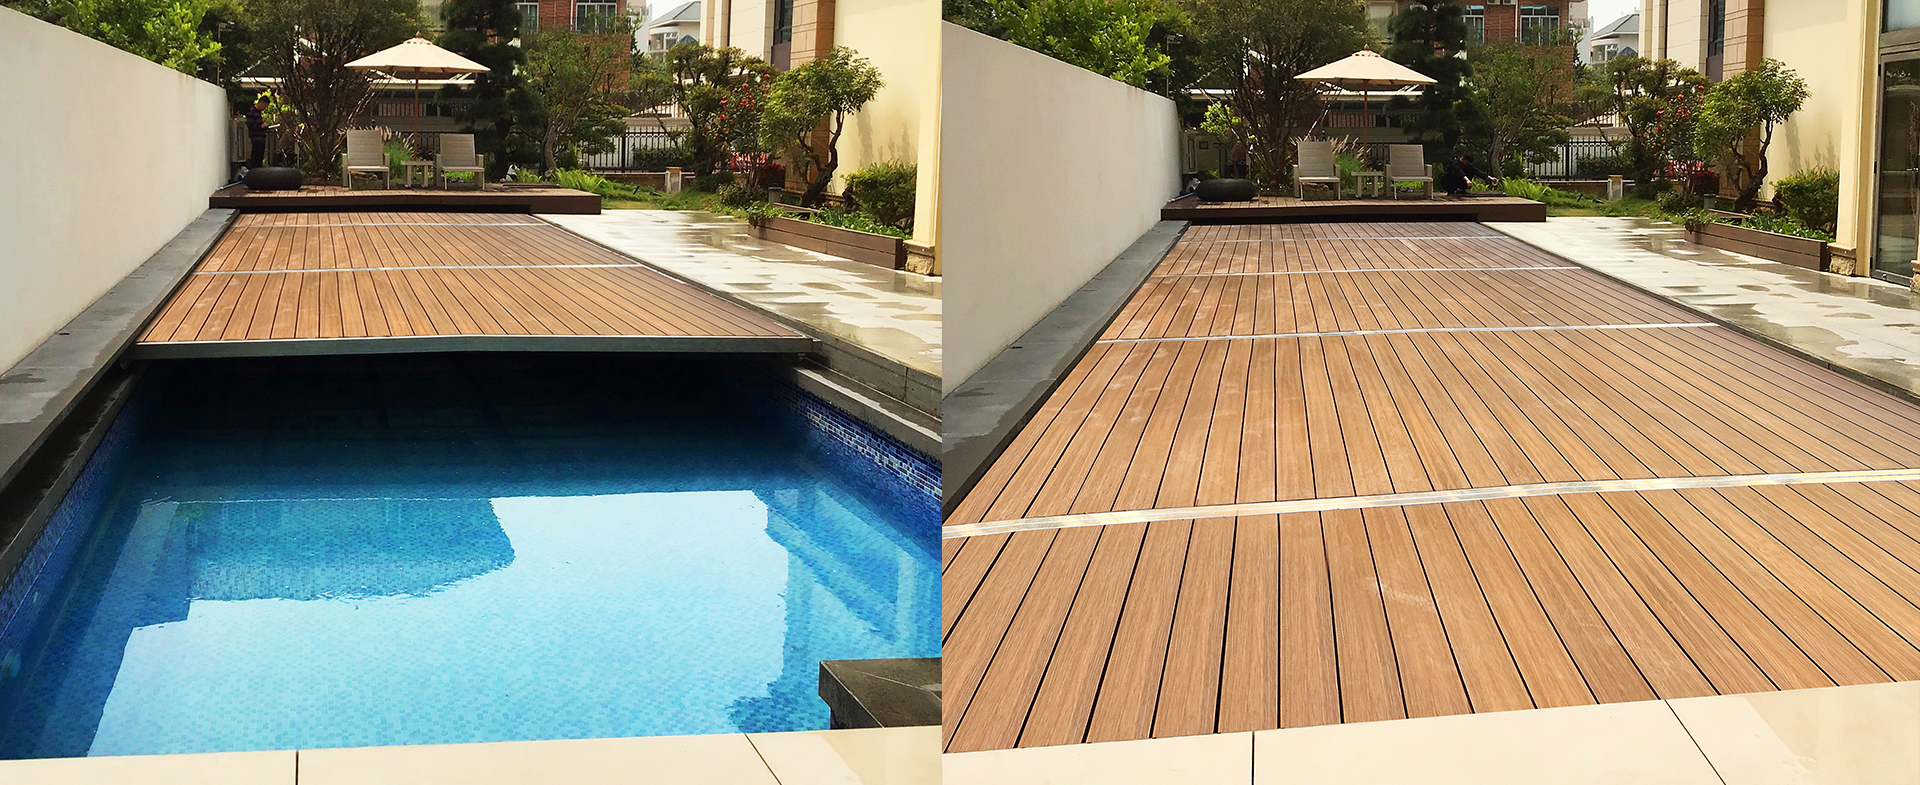 BOREE pool cover system